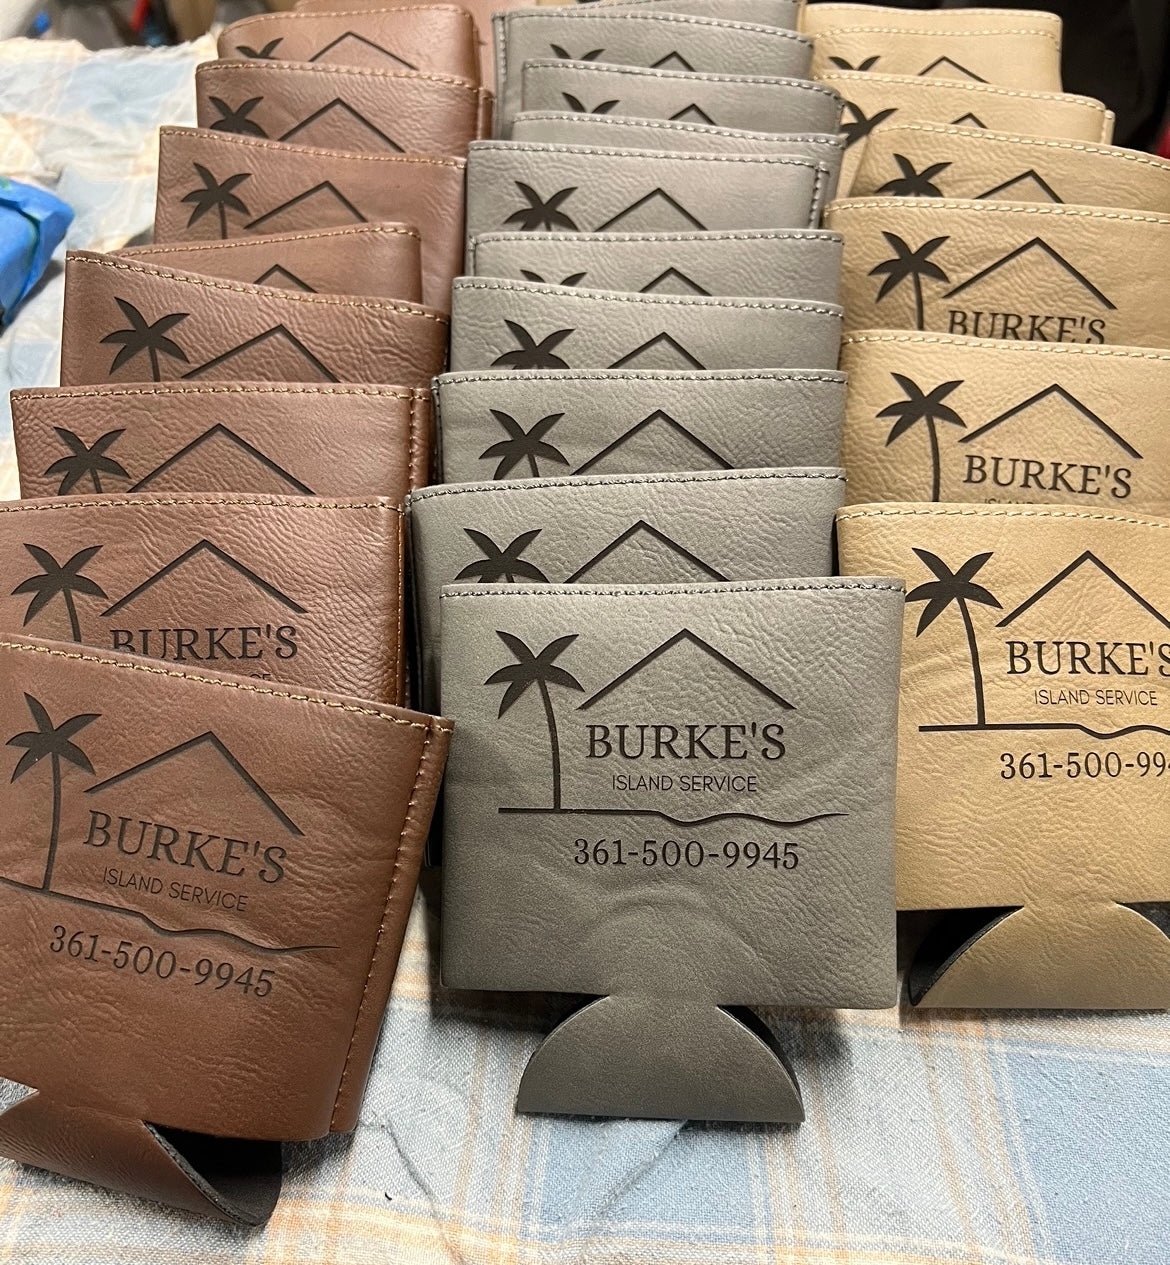 Lazer Engraved Personalized Coozies